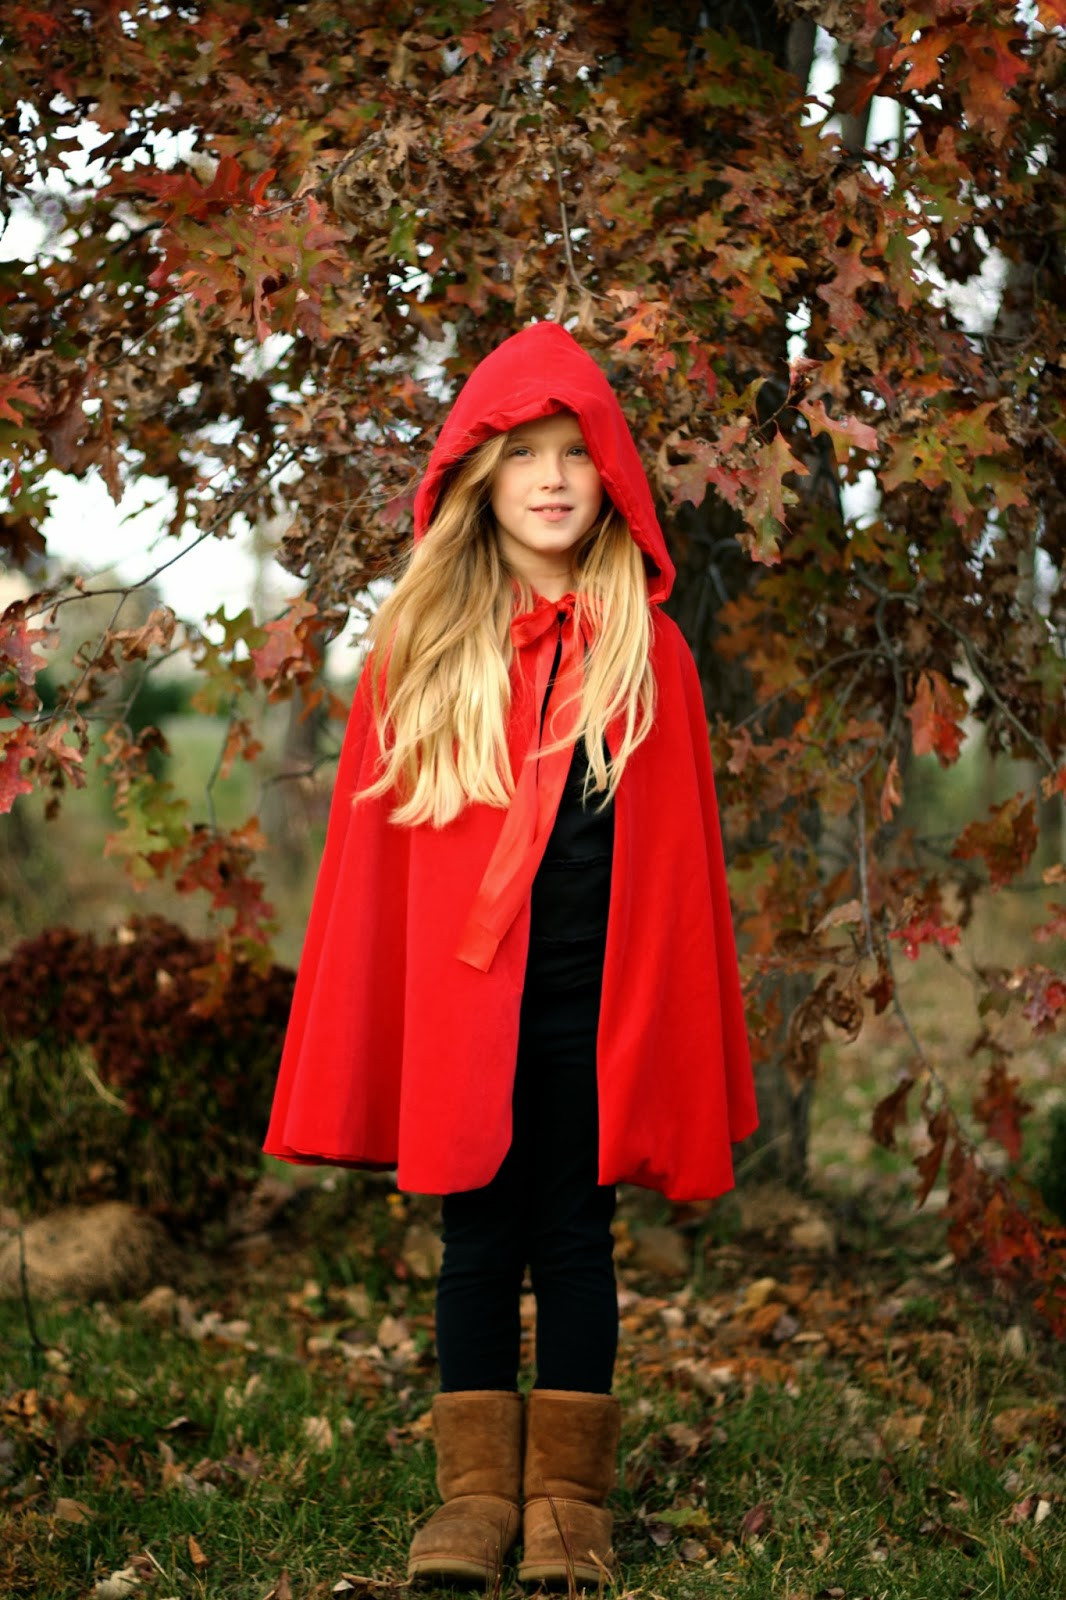 DIY Little Red Riding Hood Costume For Adults
 Keeping My Cents ¢¢¢ Bumble Bee & Little Red Riding Hood